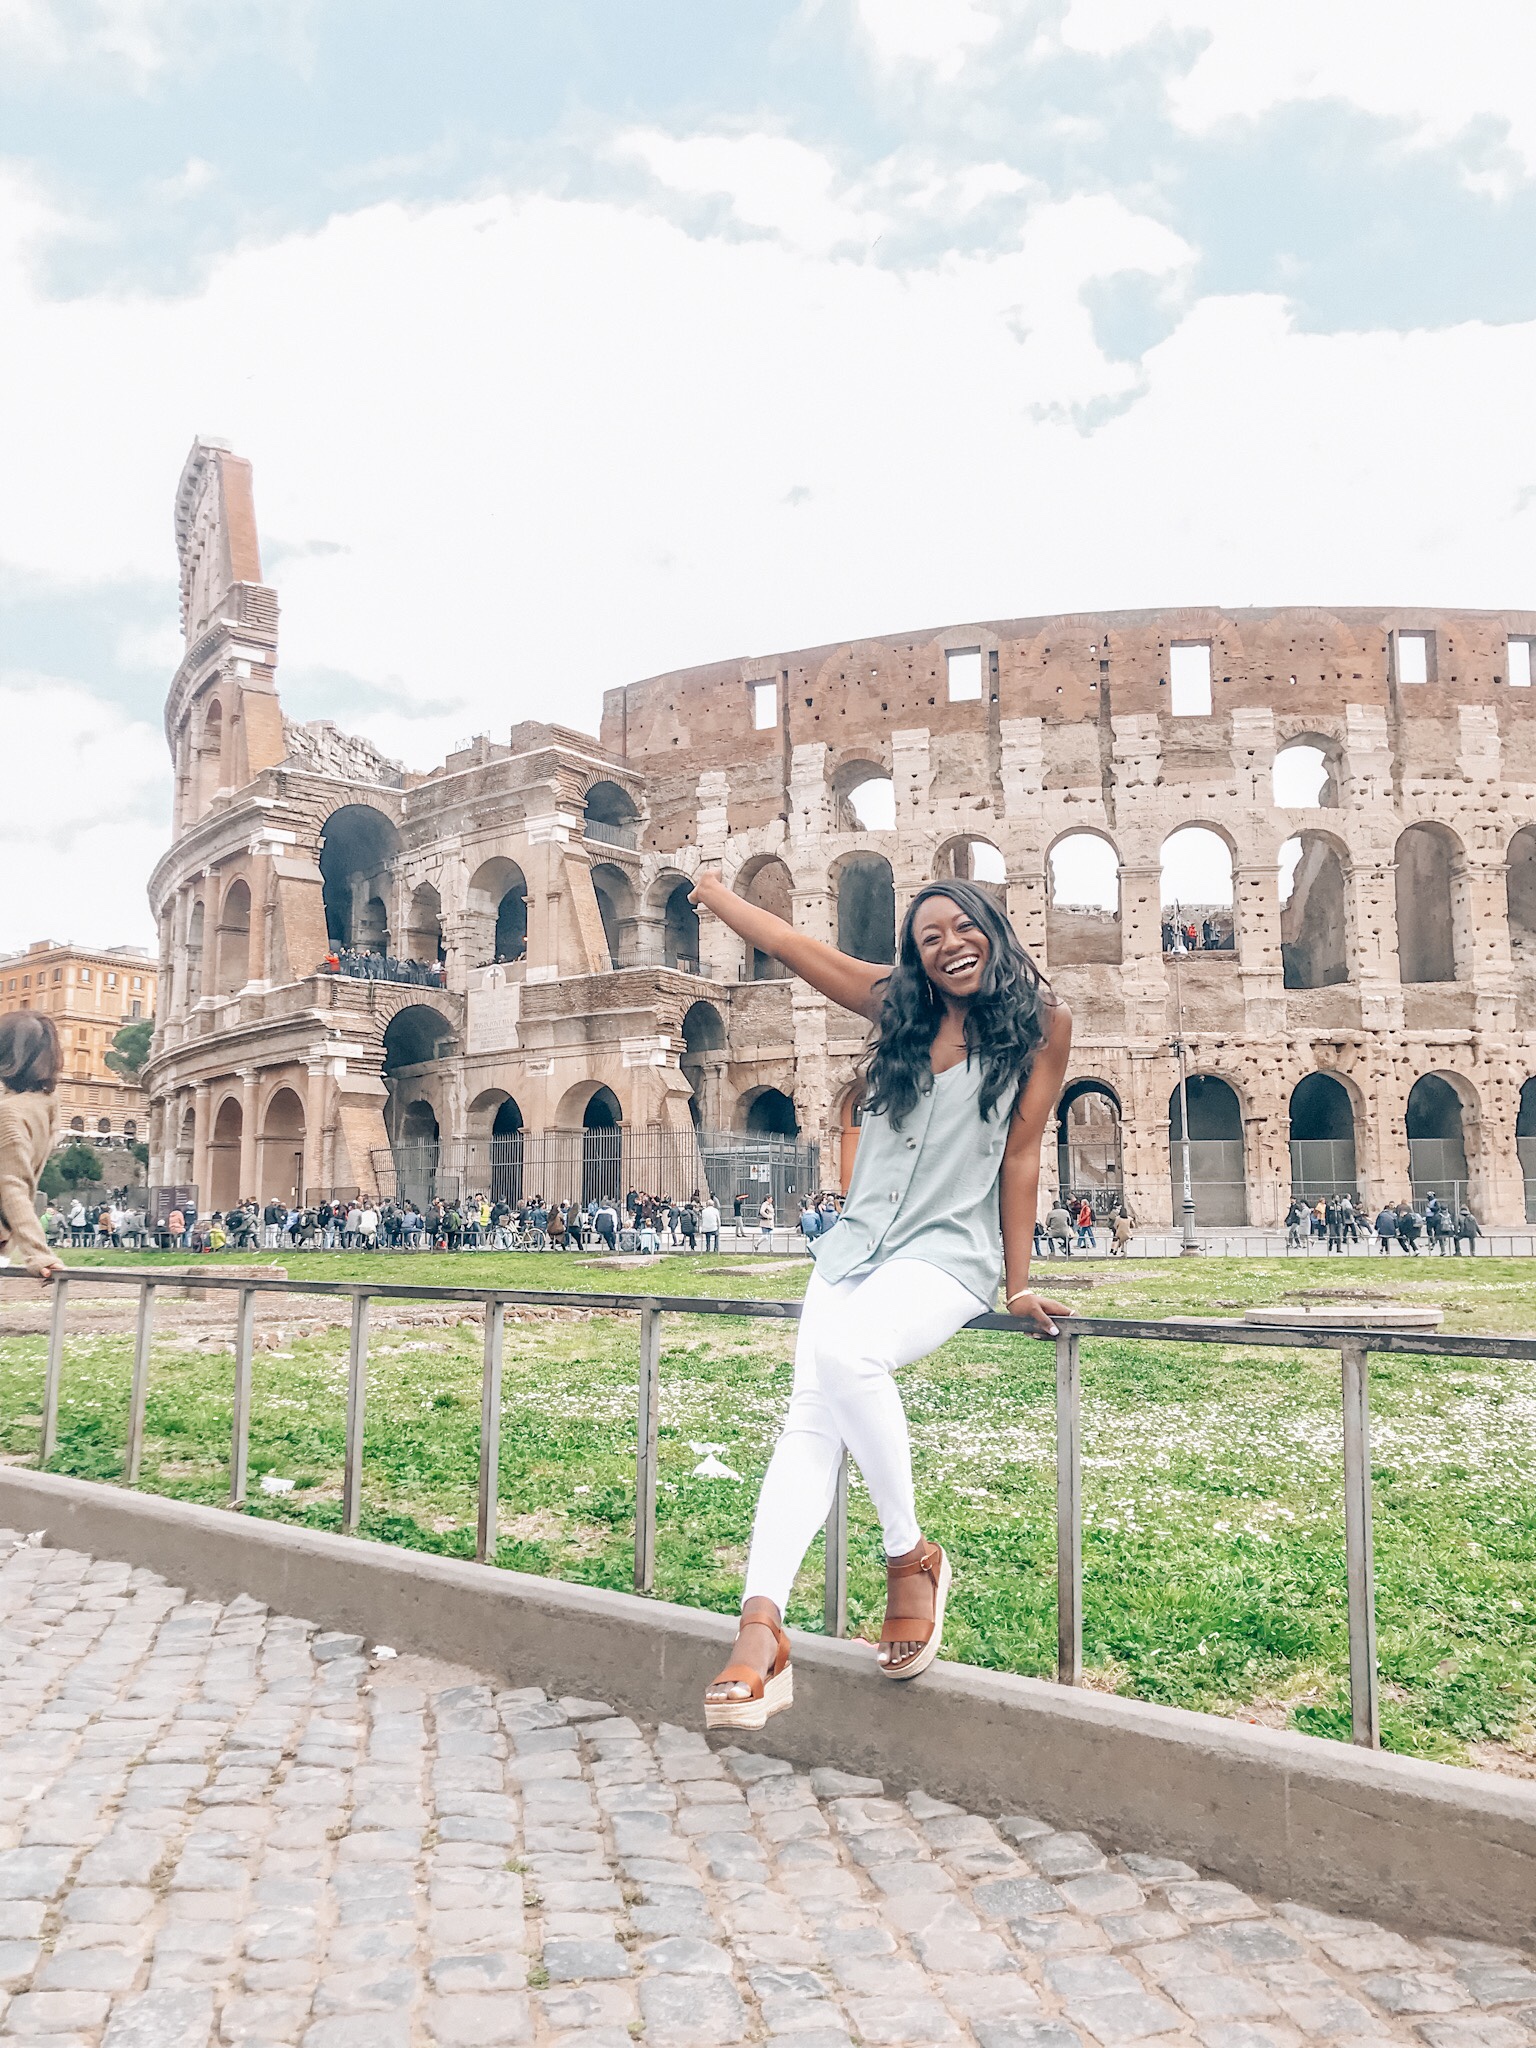 The Colosseum | What to Do in Rome, Italy Travel Guide | My top 10 favorite places I visited in Rome | GoodTomiCha.com